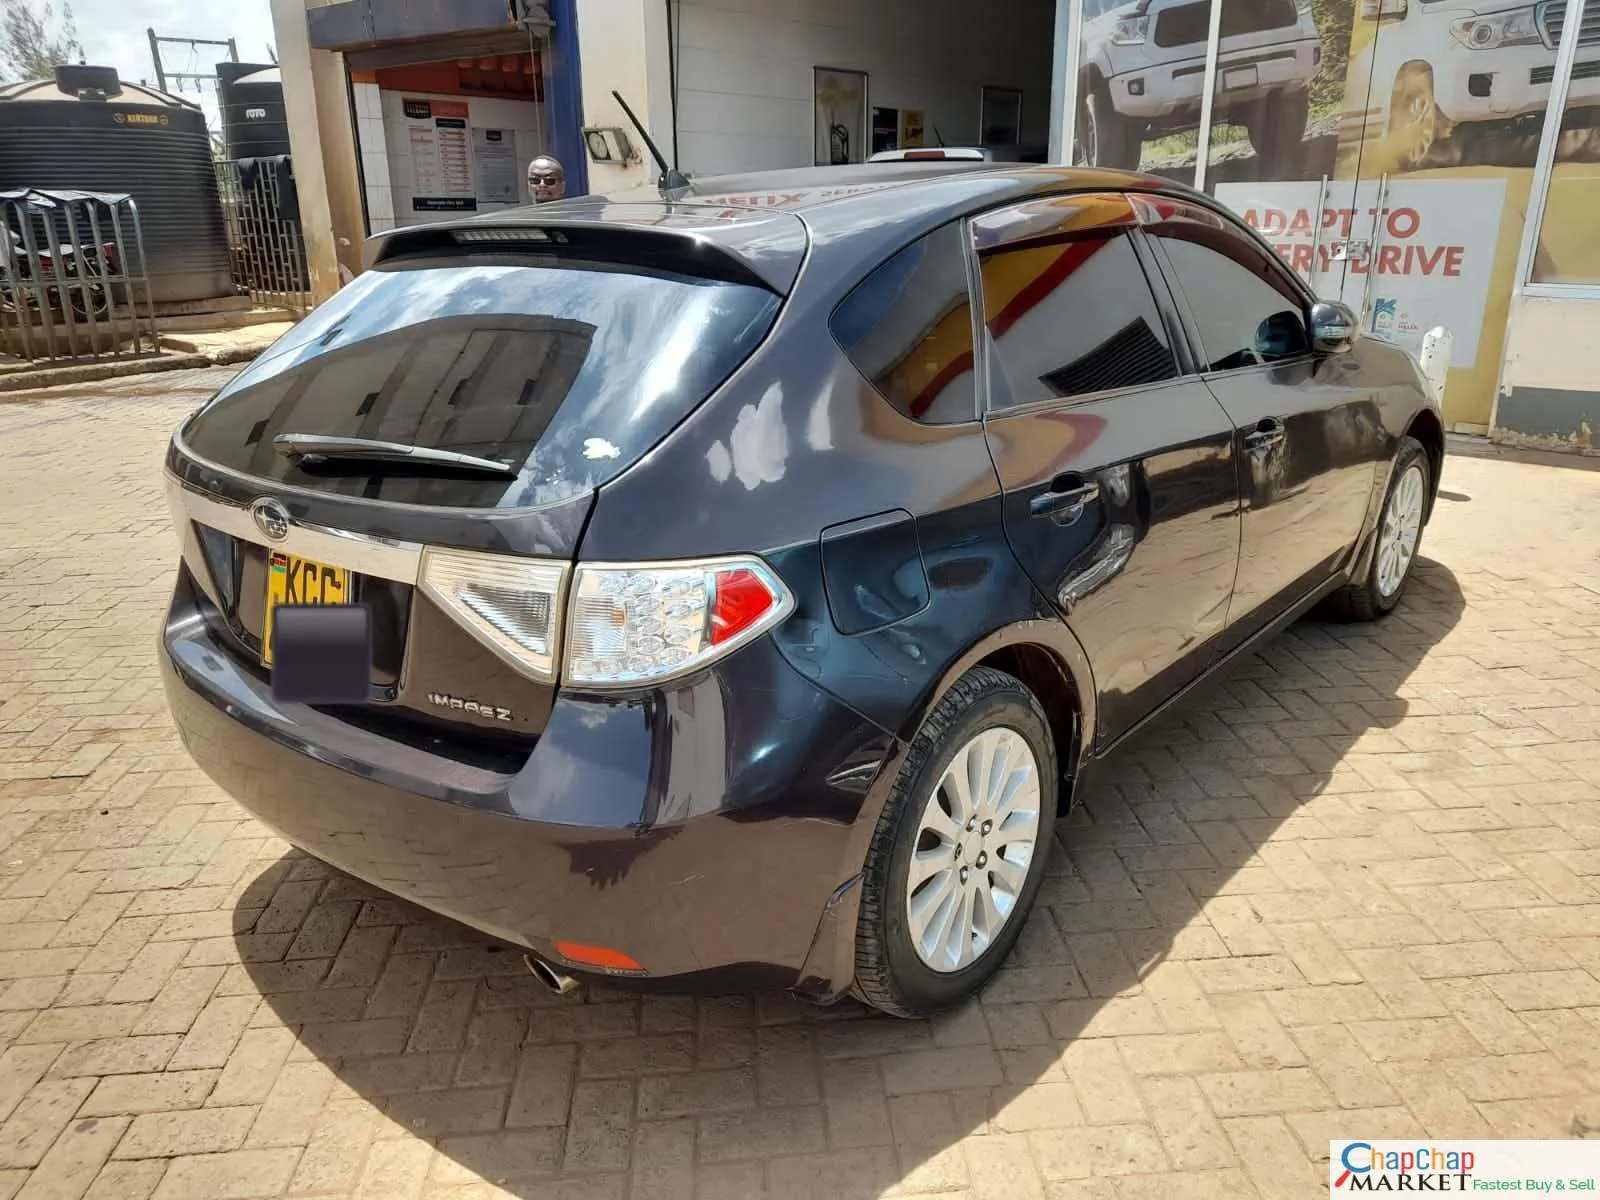 Subaru Impreza for sale in kenya 🔥 🔥 QUICK SALE You Pay 20% deposit Trade in Ok hire purchase installments